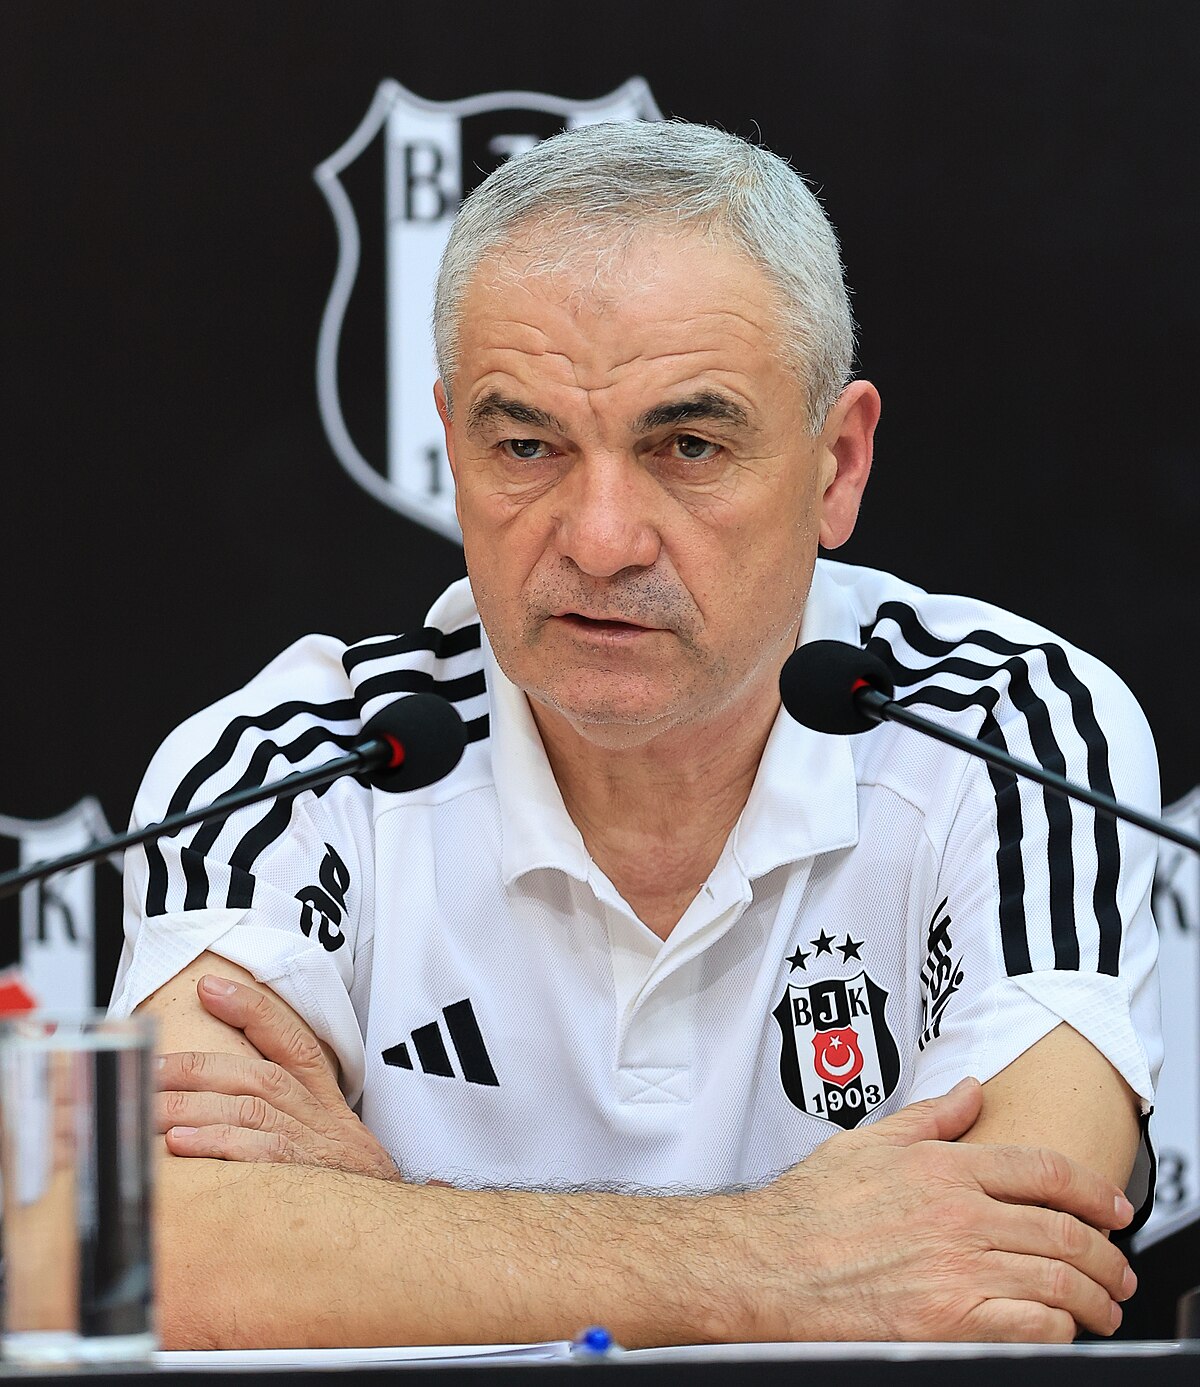 Just four months ago he was playing. Besiktas gets a new coach